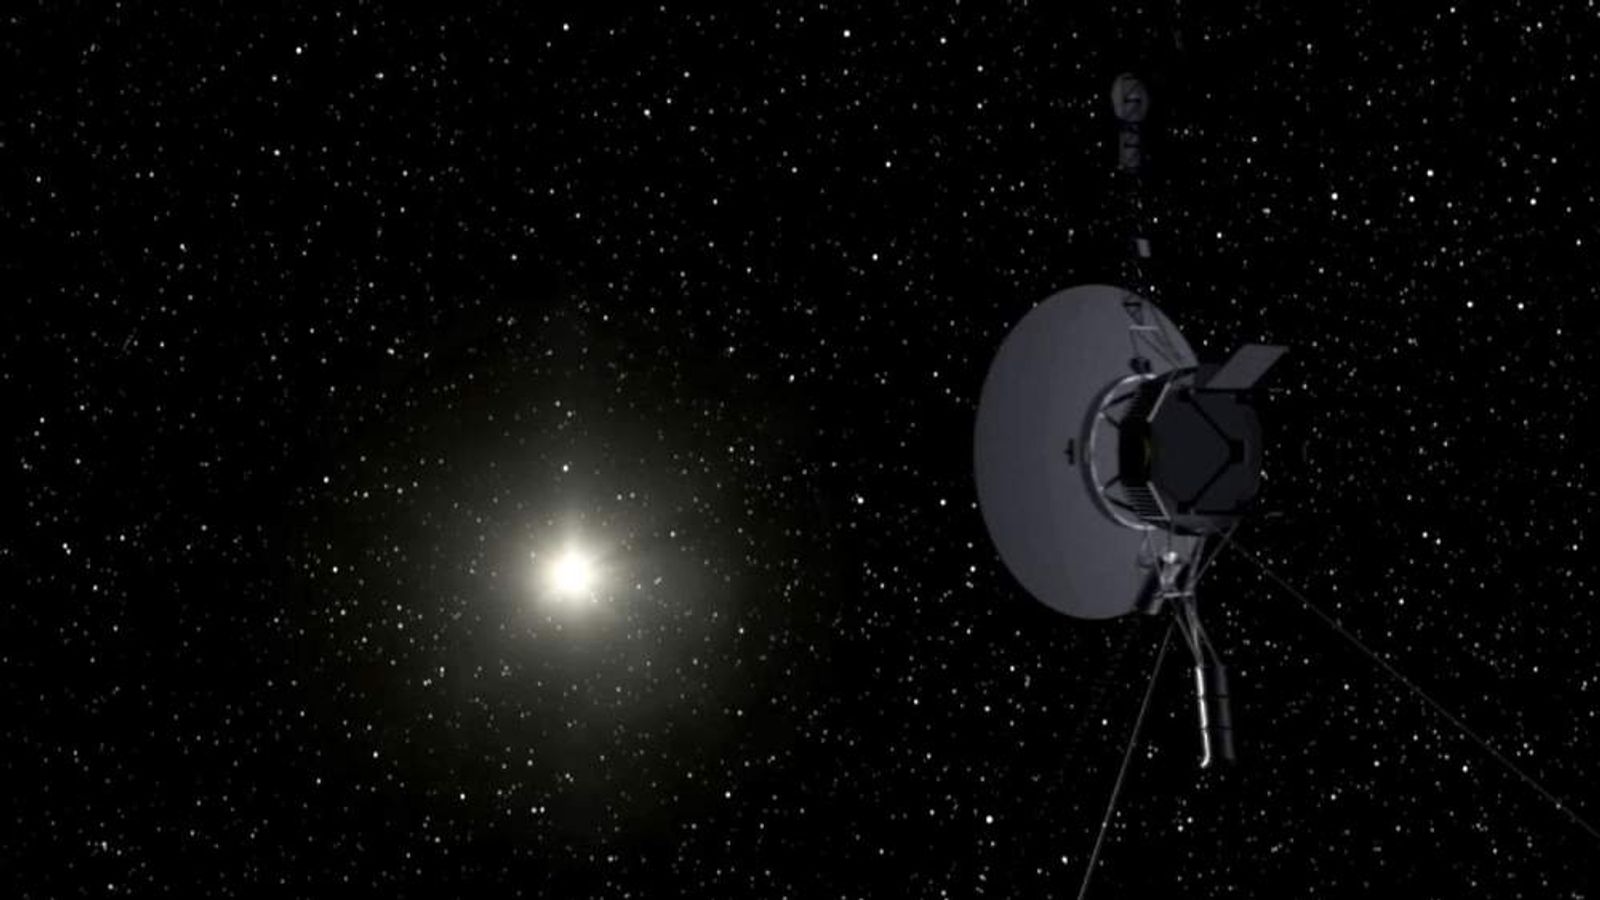 voyager 1 final message